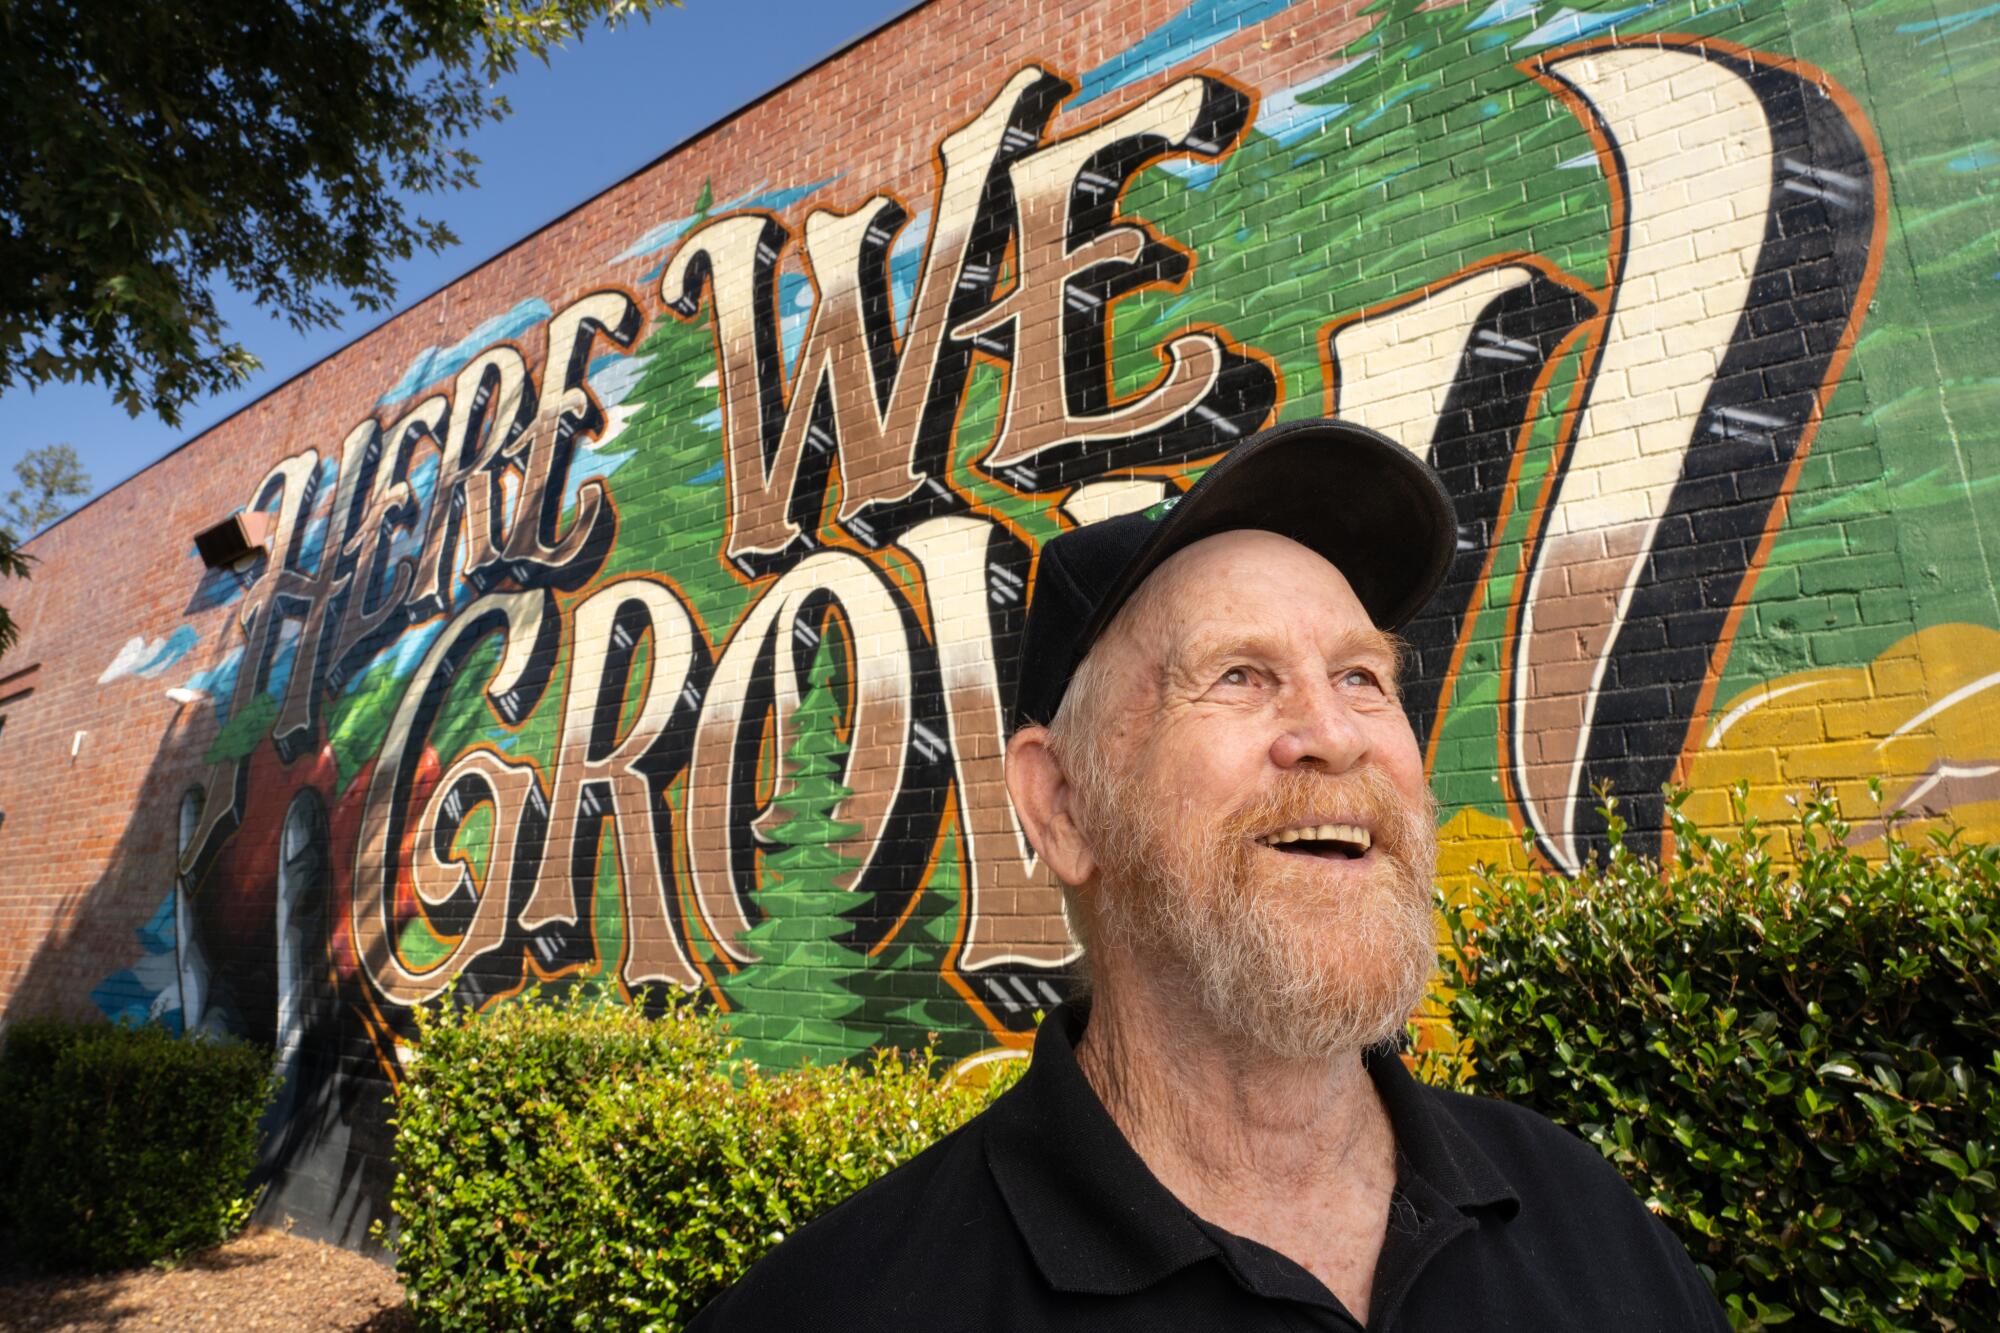 A bearded man smiles in front of a mural.
